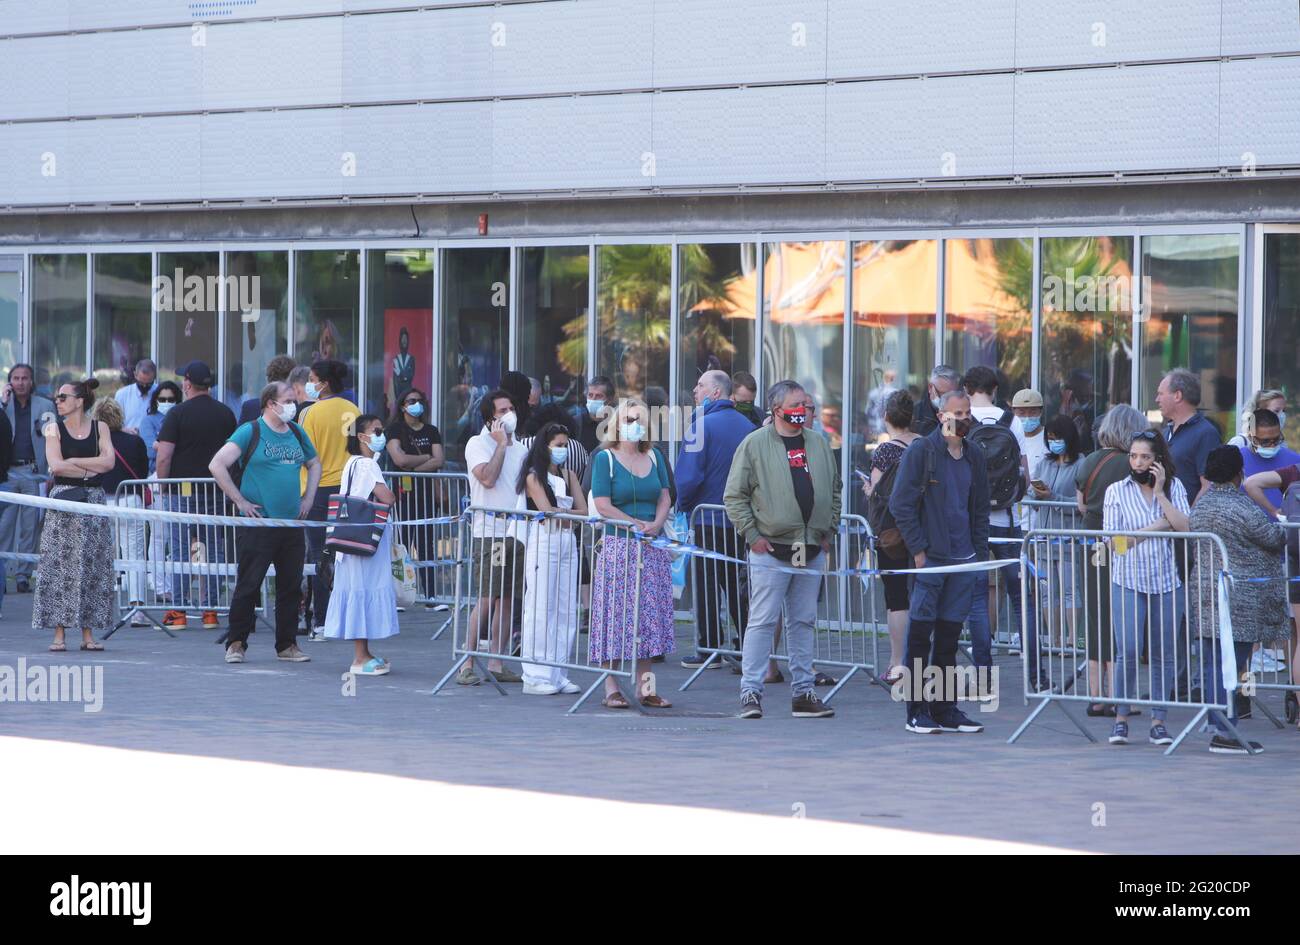 Amsterdam, Netherlands. 07th June, 2021. People wait in line in front of the GGD vaccination center against coronavirus at the Bijlmer Arena on June 7, 2021 in Amsterdam, Netherlands. The Dutch public health agency RIVM reported the number of new coronavirus infections in the Netherlands dropping today to 1490, so far approximately 10.6 million vaccine doses have been administered. (Photo by Paulo Amorim/Sipa USA) Credit: Sipa USA/Alamy Live News Stock Photo